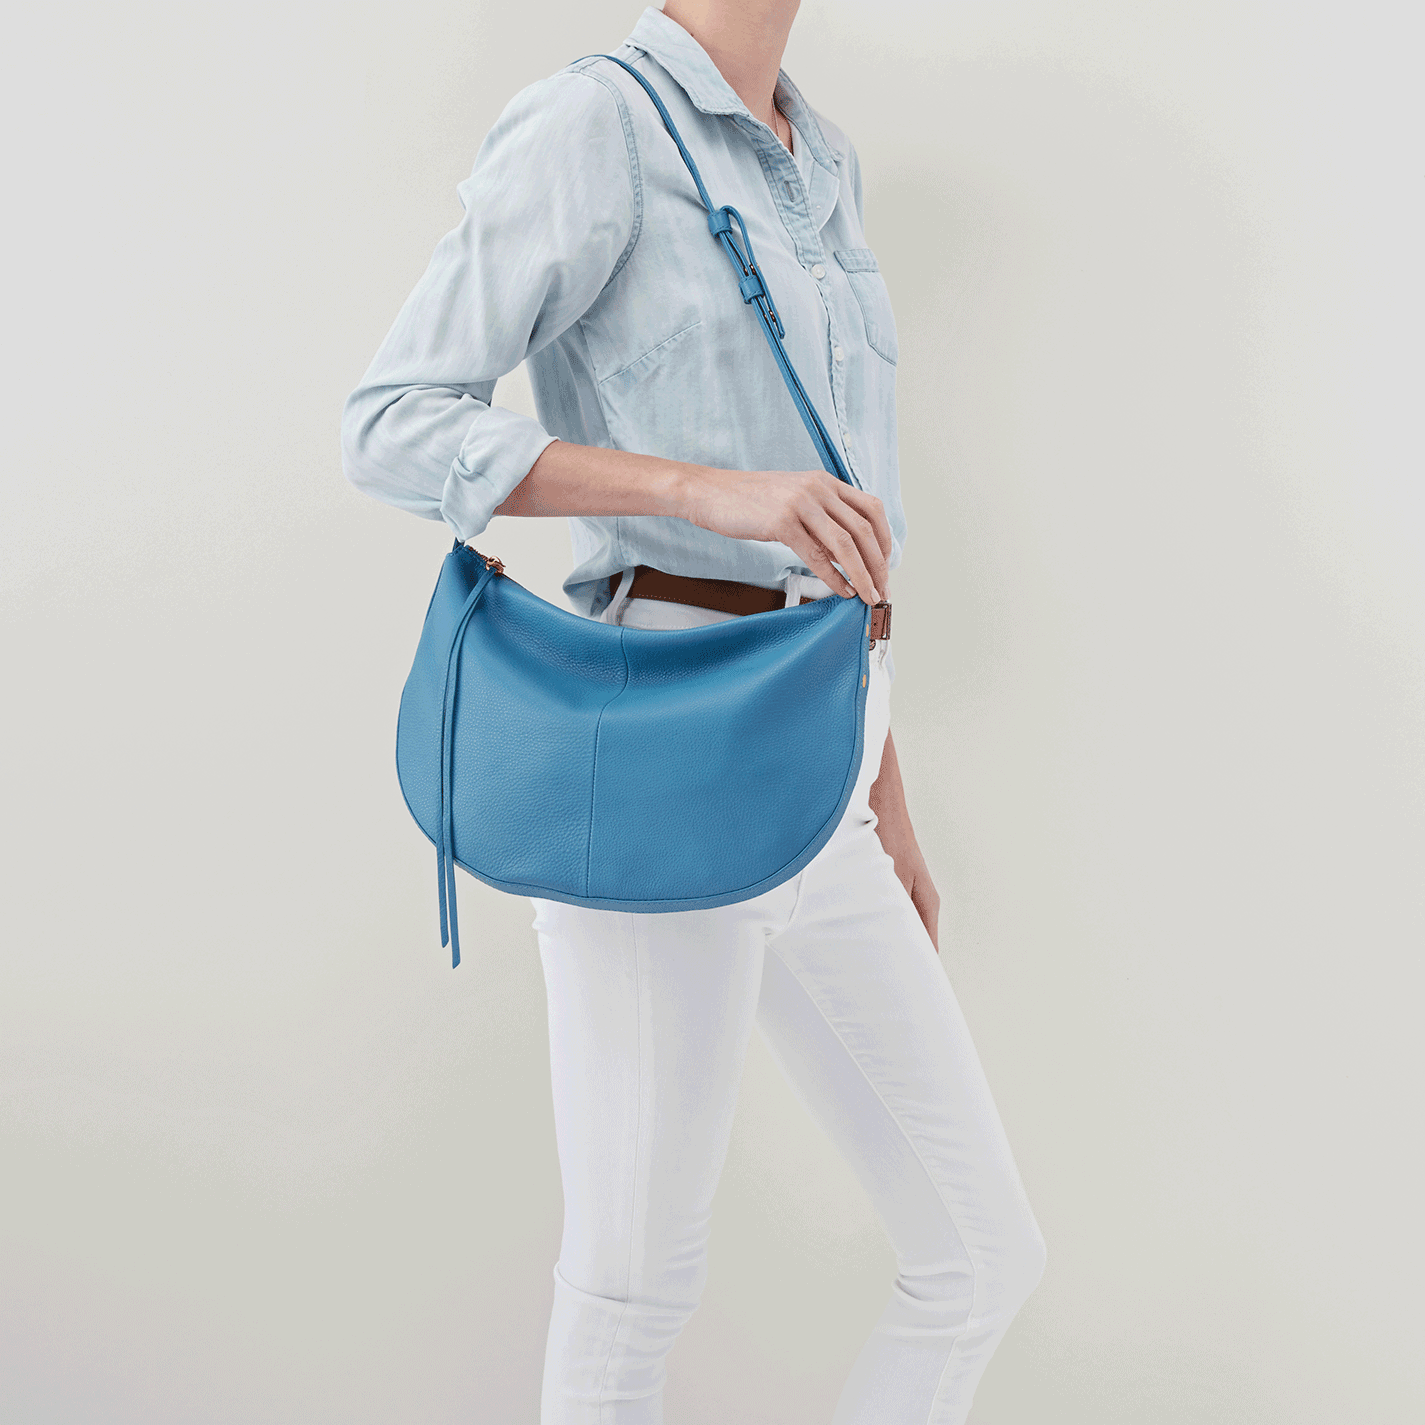 Meet Cosmo. A beautiful half-moon shaped bag with a convertible strap, allowing you to wear it as a shoulder bag or crossbody. Crafted in our signature velvet hide, our softest and most casual leather that only gets more beautiful over time.